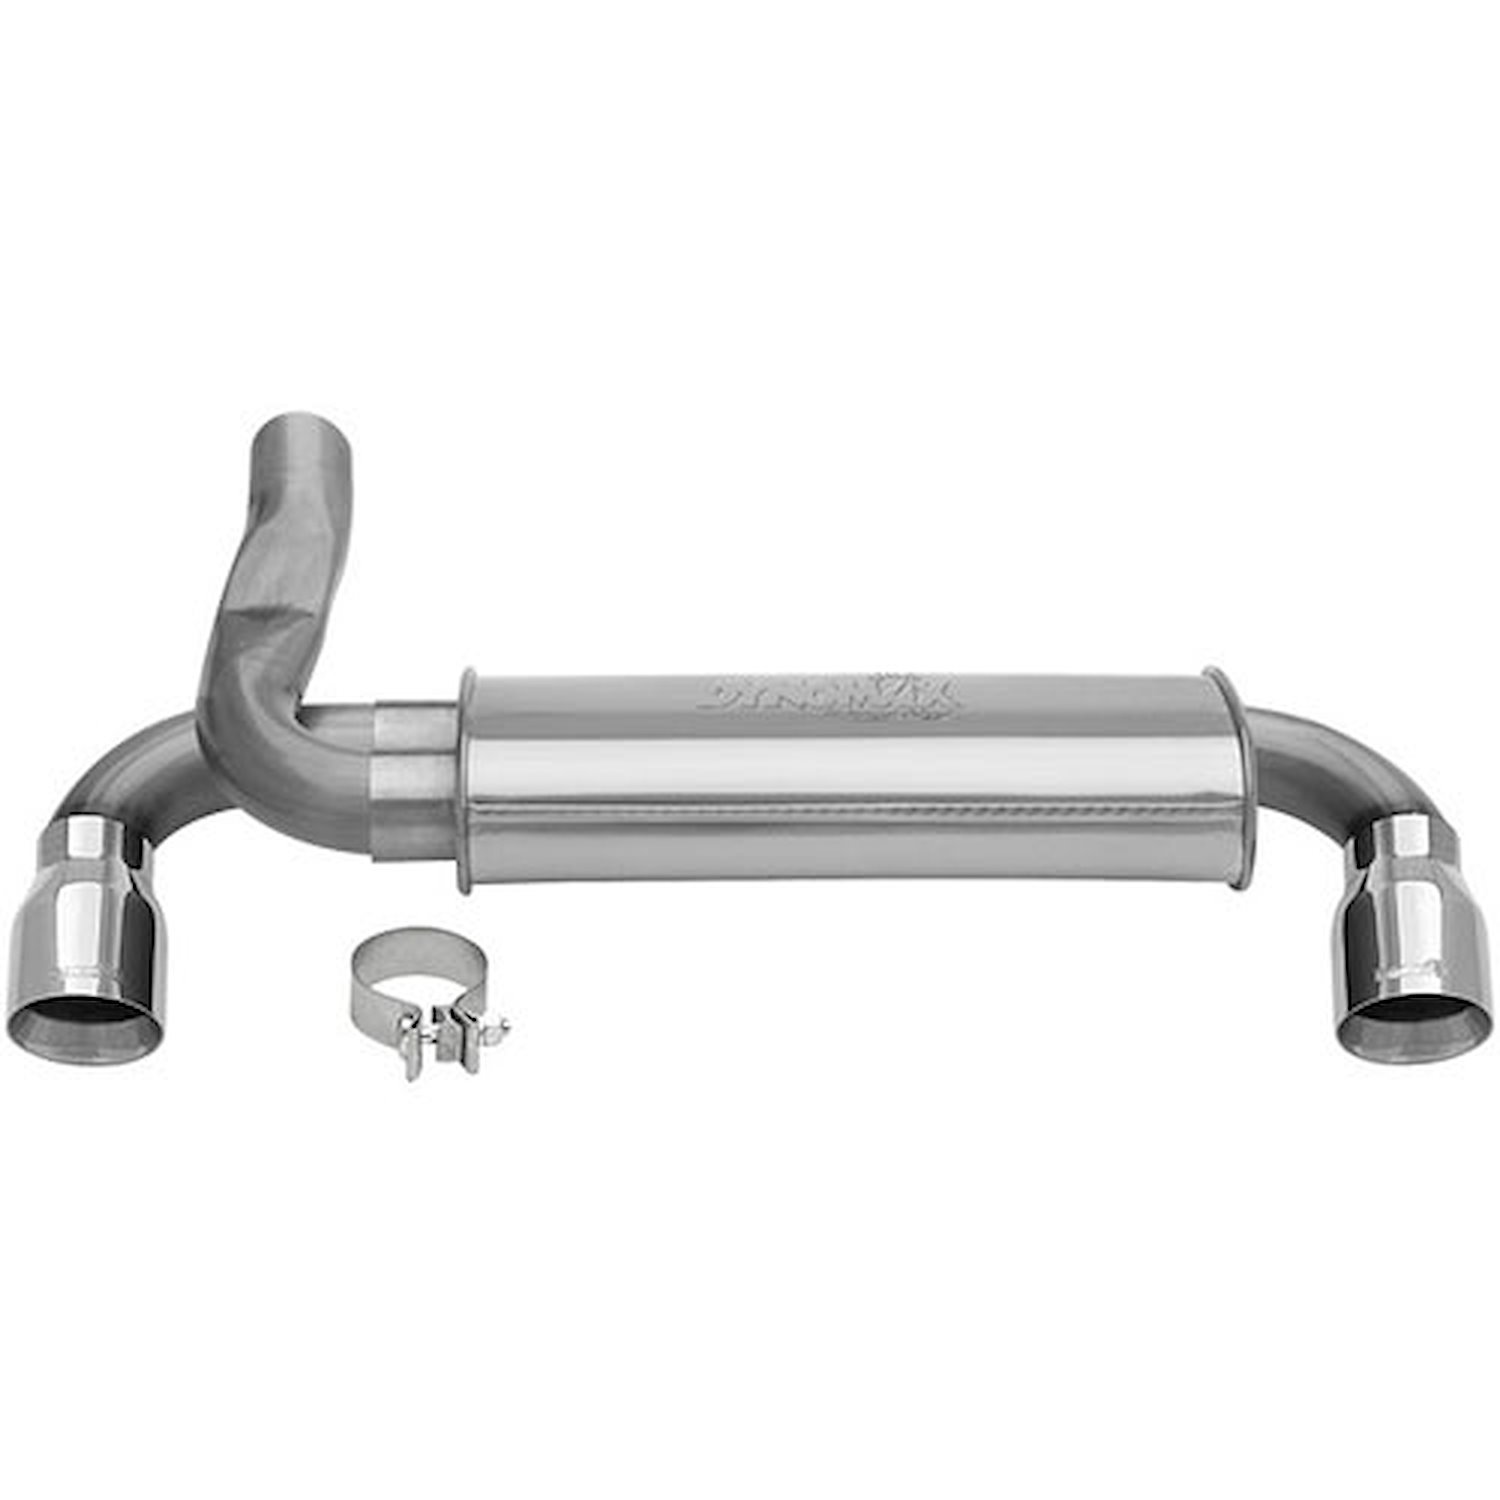 Axle-Back Exhaust System Super Turbo System